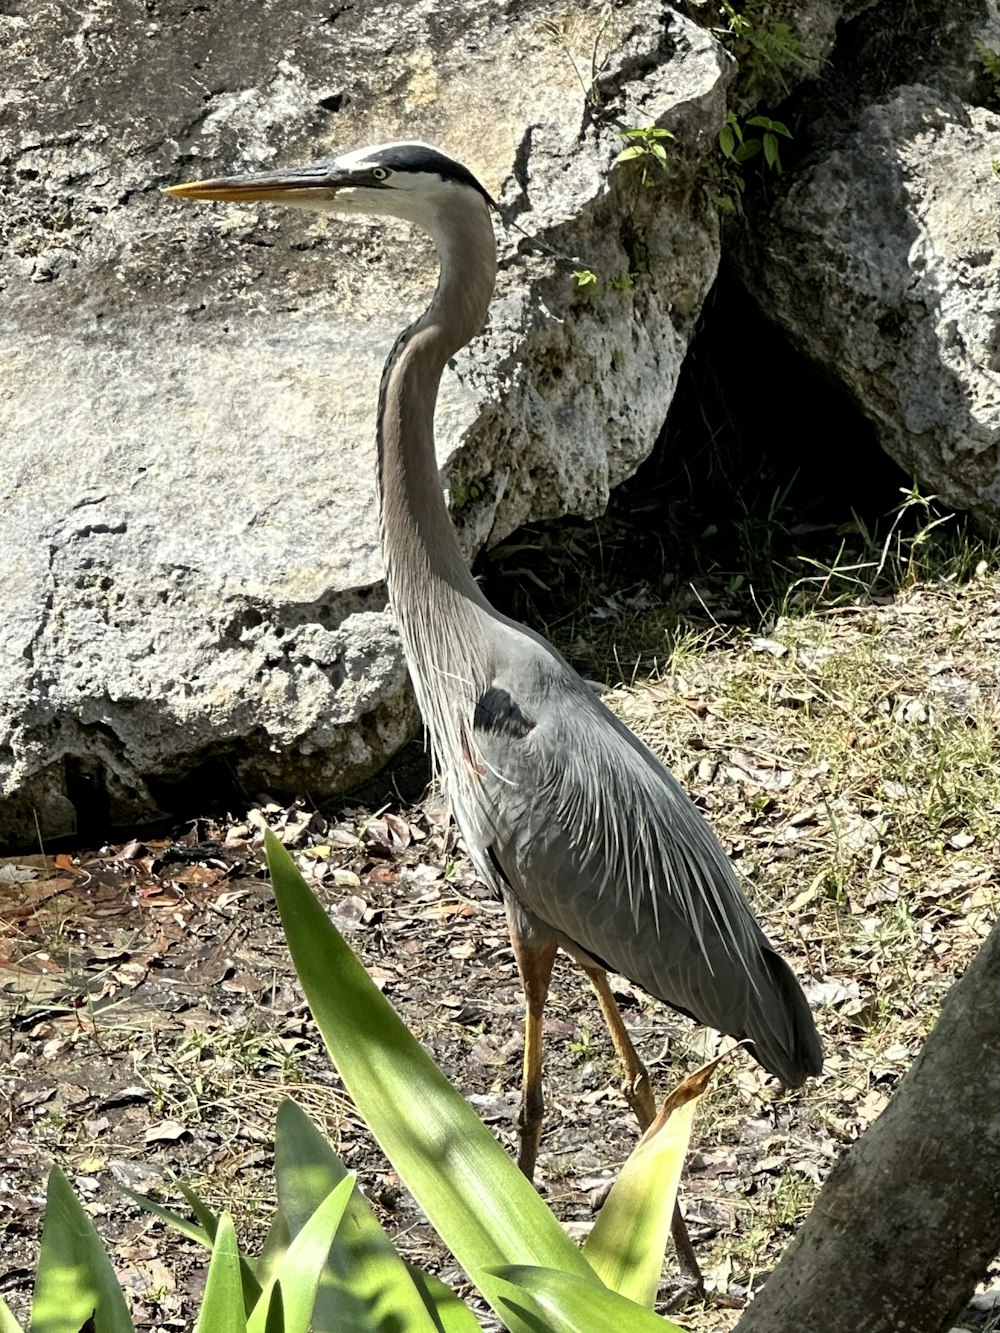 a bird with a long neck standing next to a rock